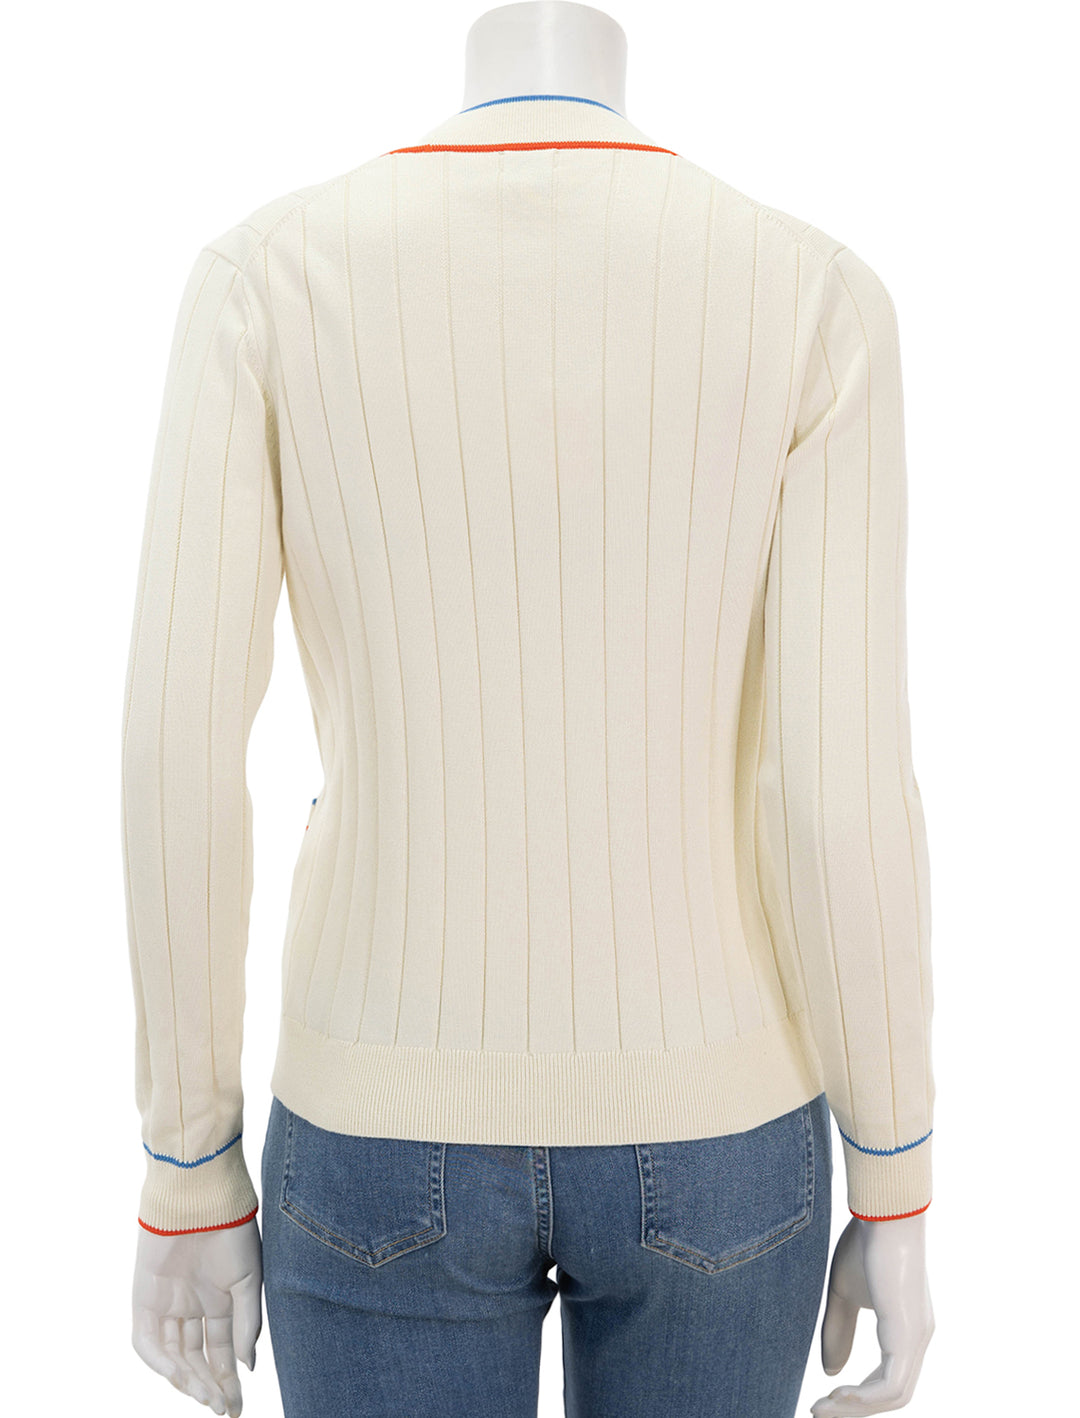 back view of the dede cardi in cream